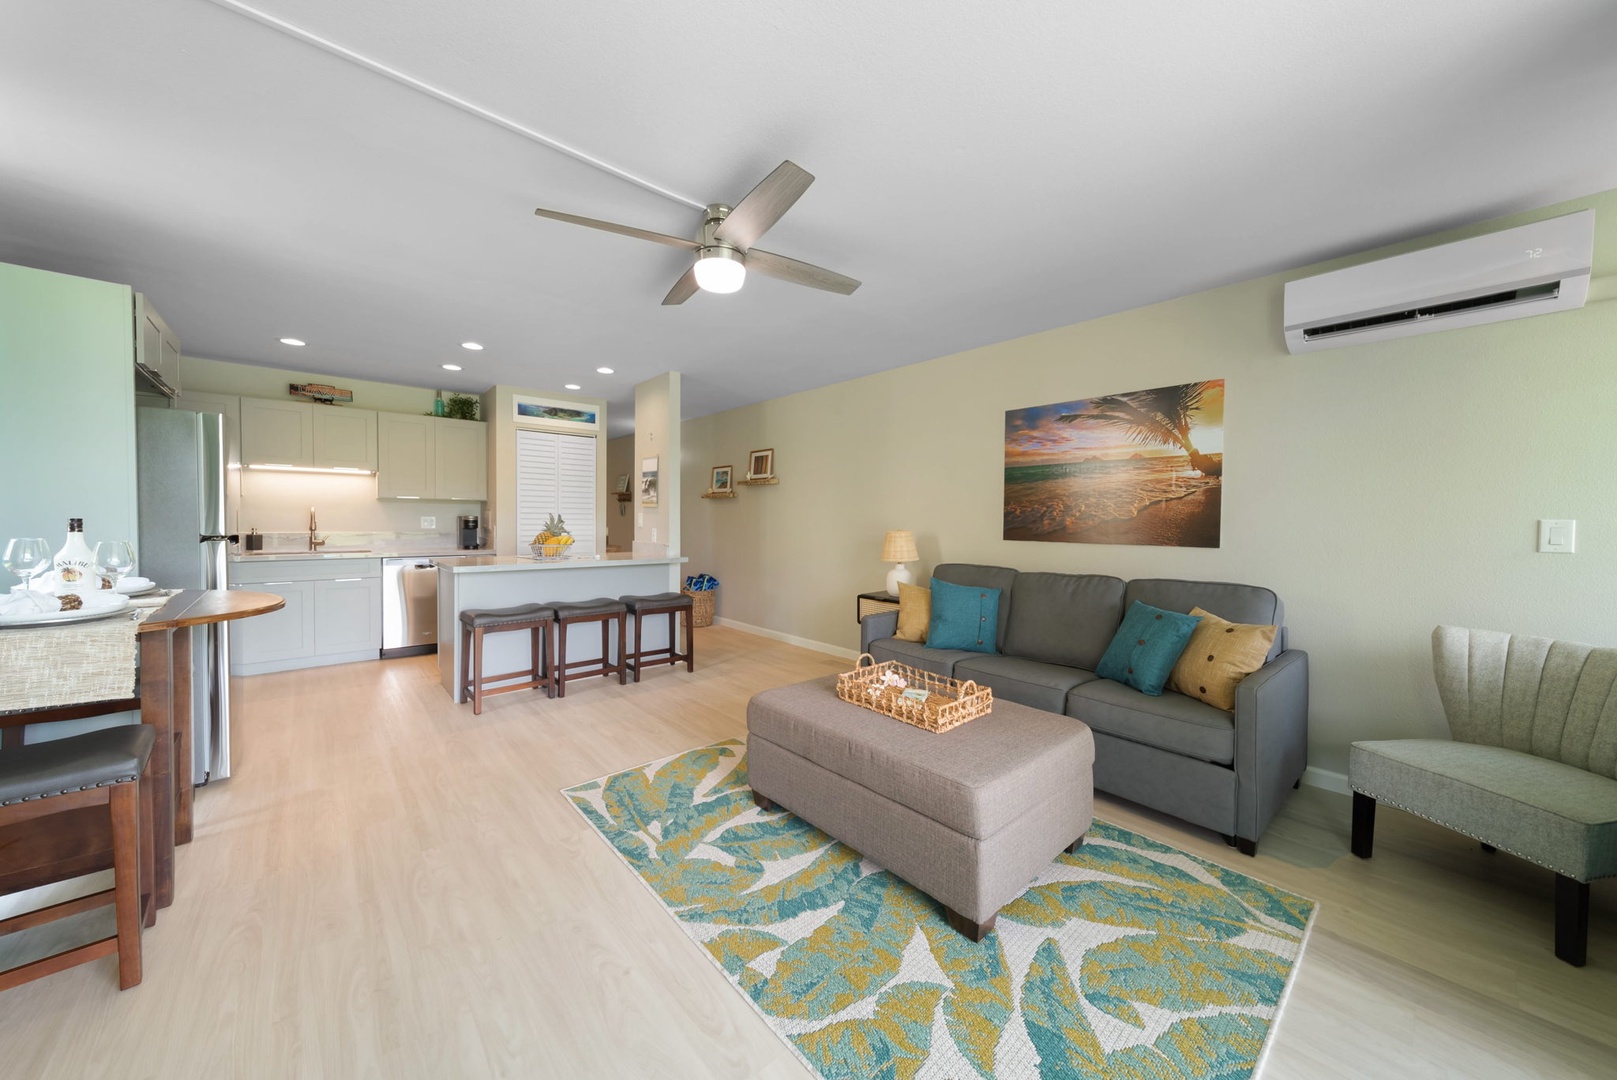 Kahuku Vacation Rentals, Turtle Bay's Kuilima Estates West #104 - The open concept living area opens up to the kitchen